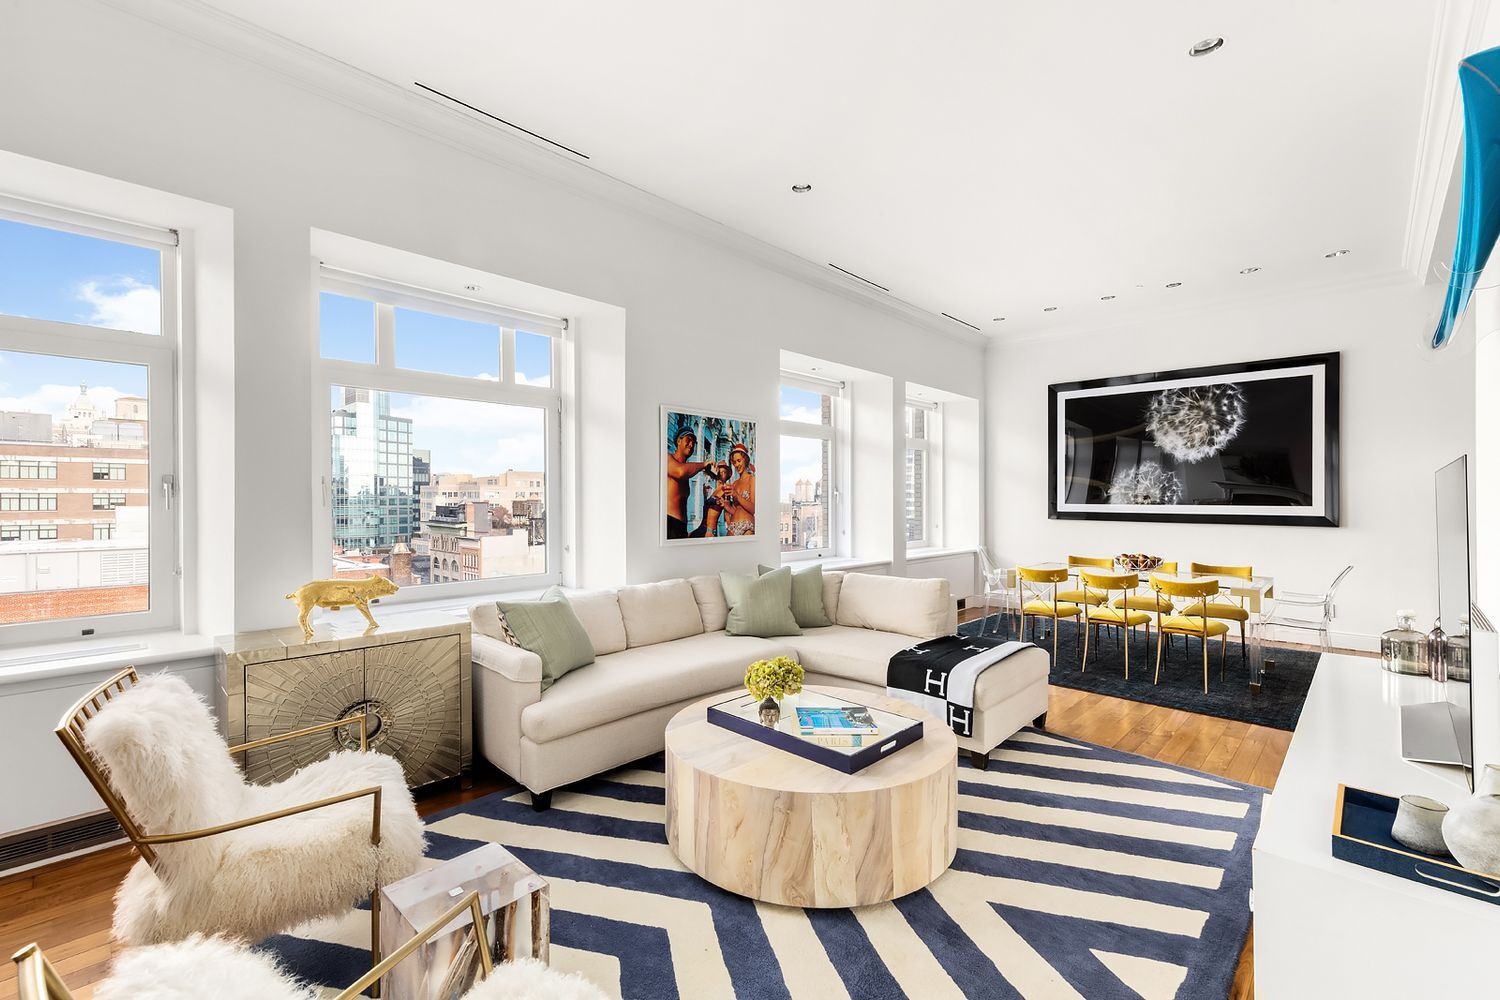 The living room/dining room in Britney Spears' former NYC penthouse